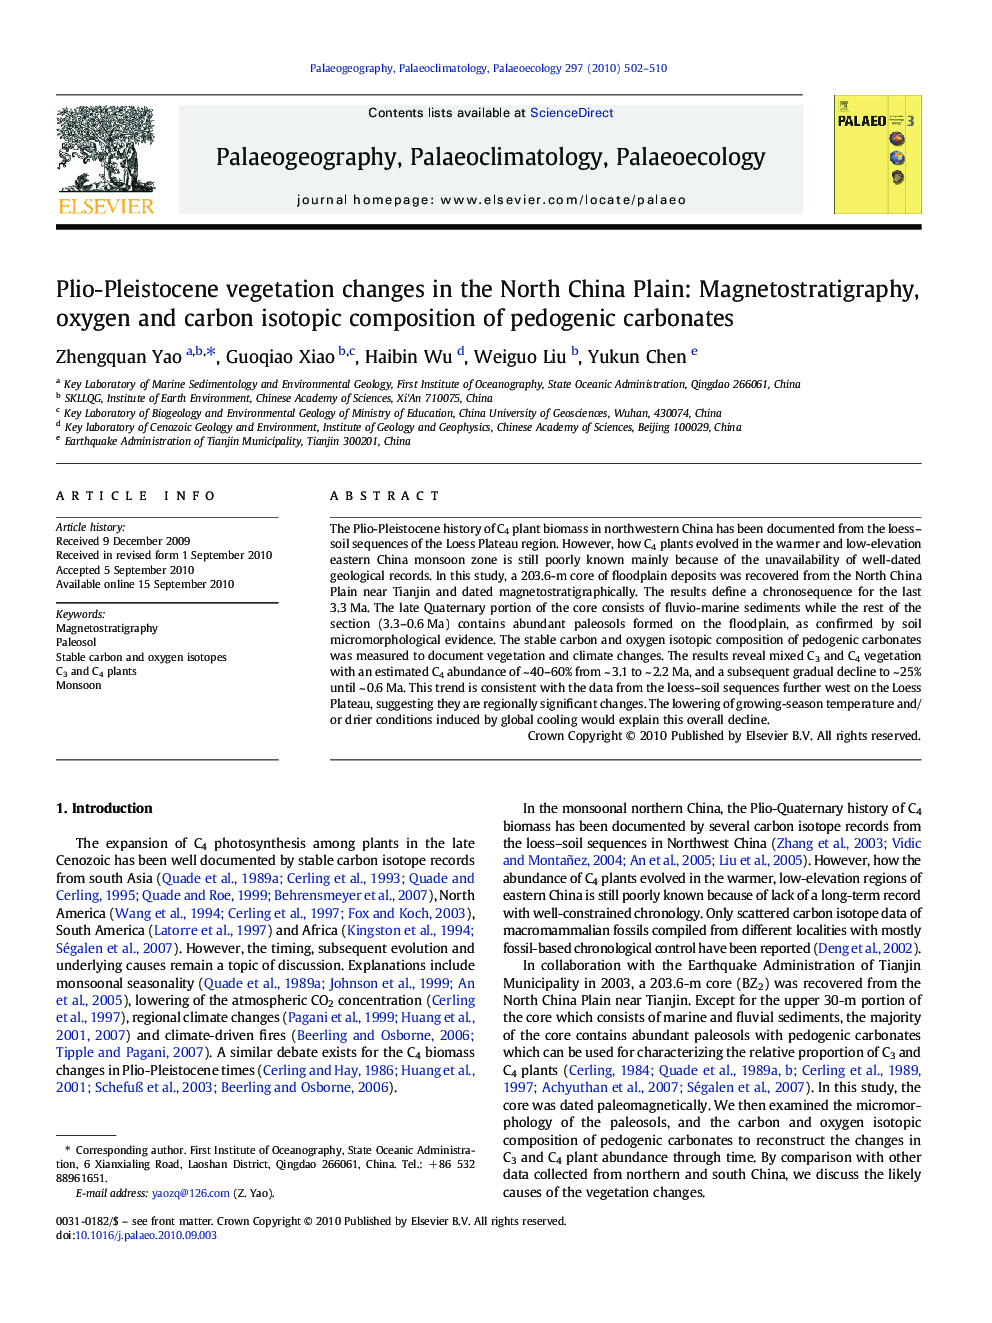 Plio-Pleistocene vegetation changes in the North China Plain: Magnetostratigraphy, oxygen and carbon isotopic composition of pedogenic carbonates